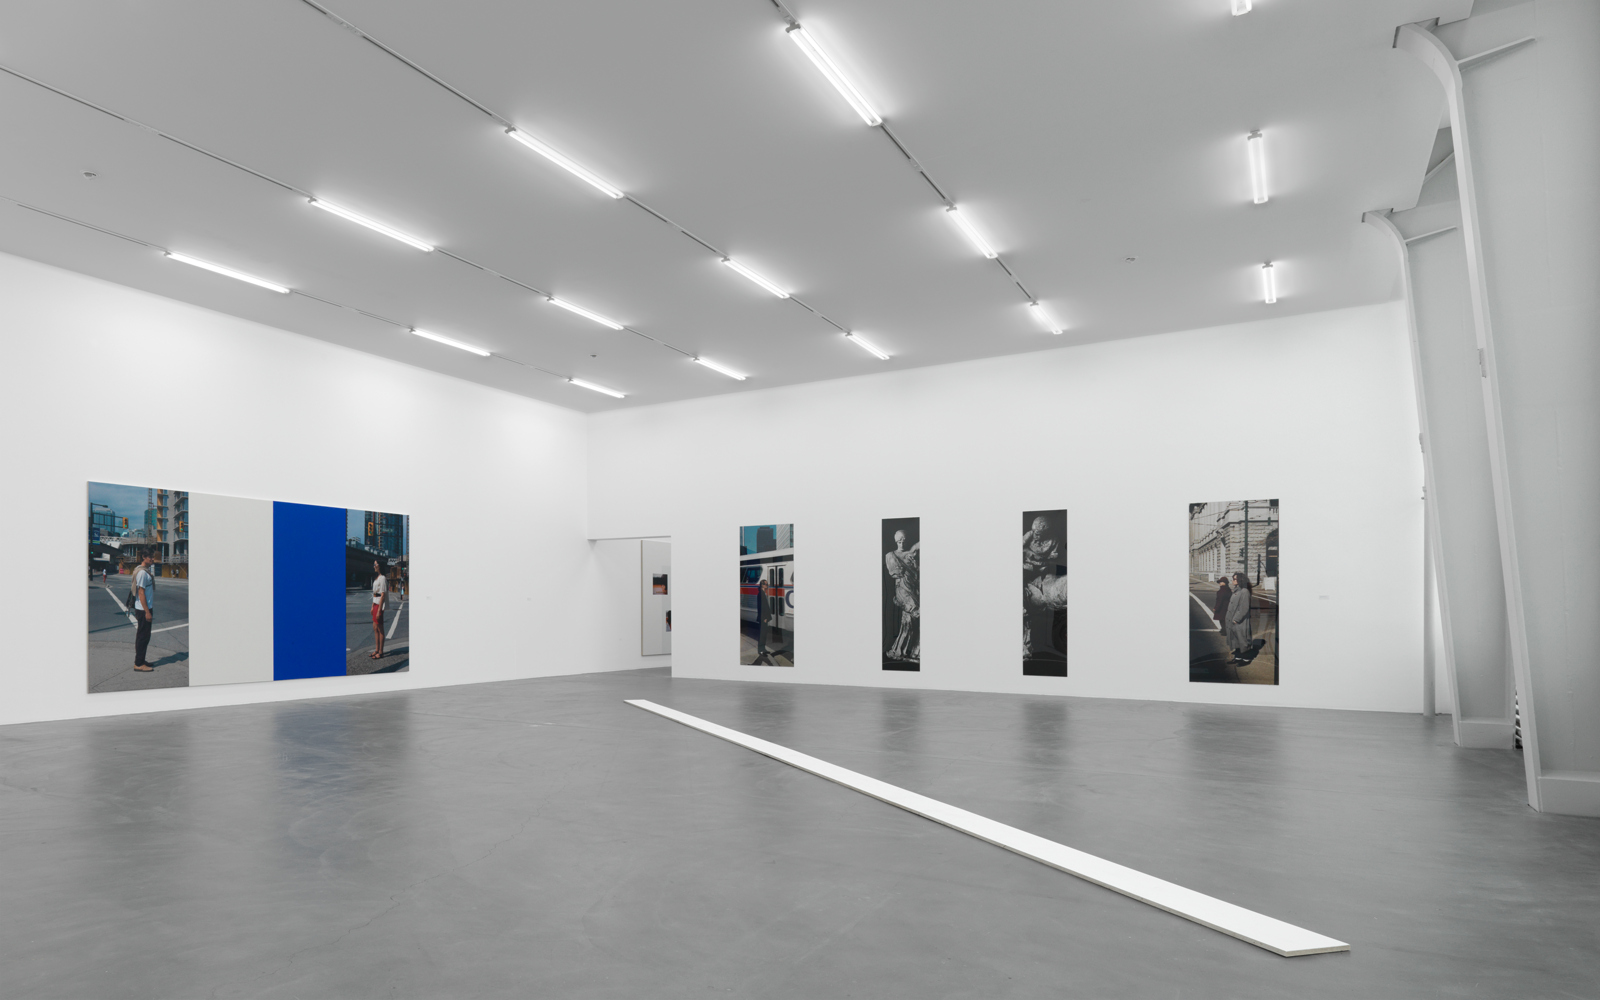 Ian Wallace / "A literature of images", exhibition view, Kunsthalle Zürich / 2008